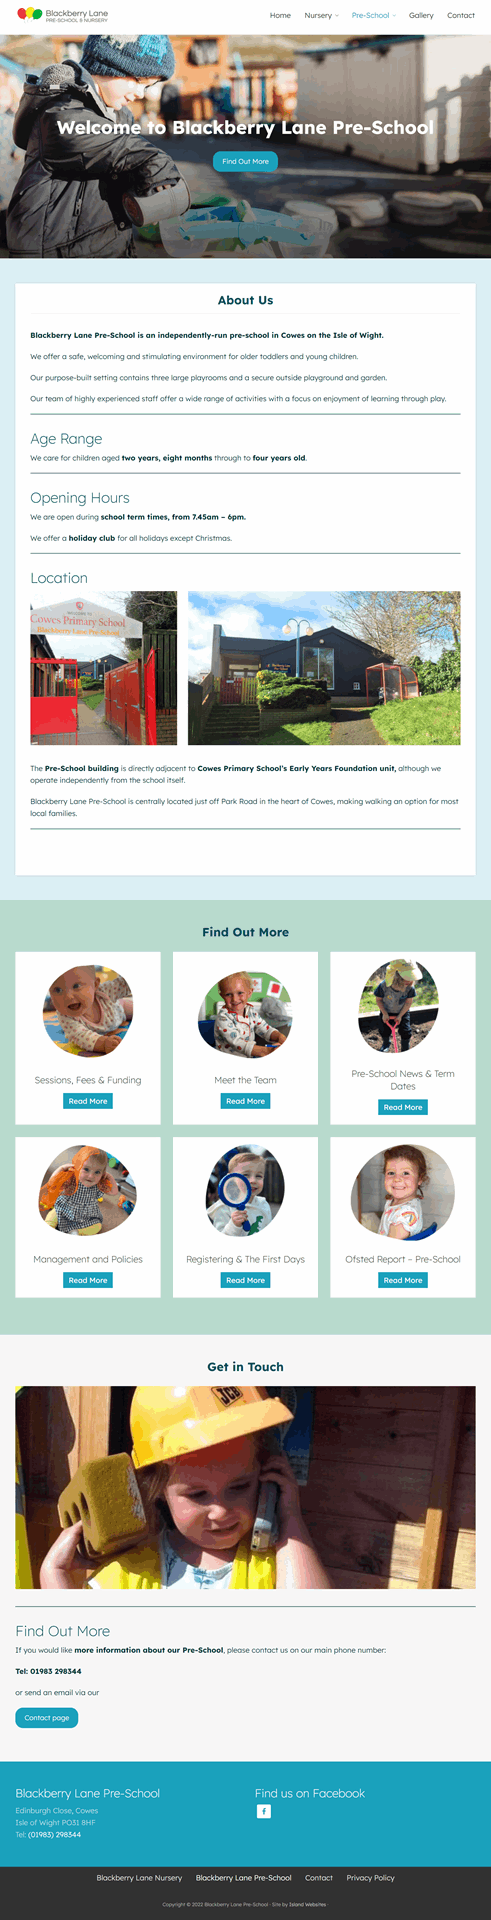 home page of the Blackberry Lane pre-school and nursery website, showing a toddler playing outdoors and smiling